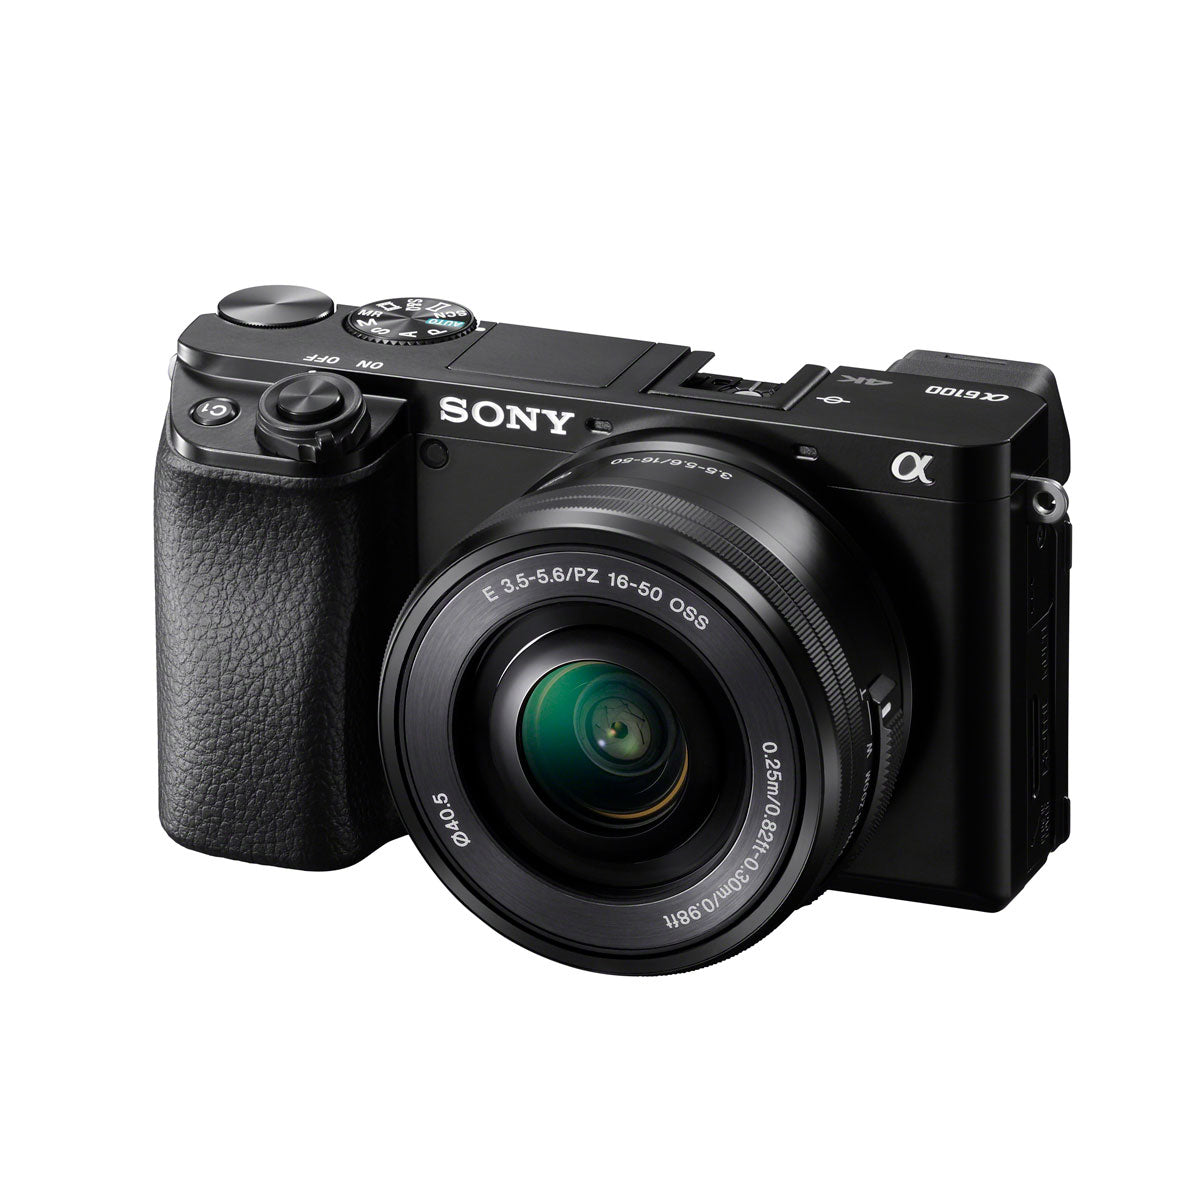 Sony Alpha a6100 Mirrorless Digital Camera with E-Mount 16-50mm & 55-210mm Lenses